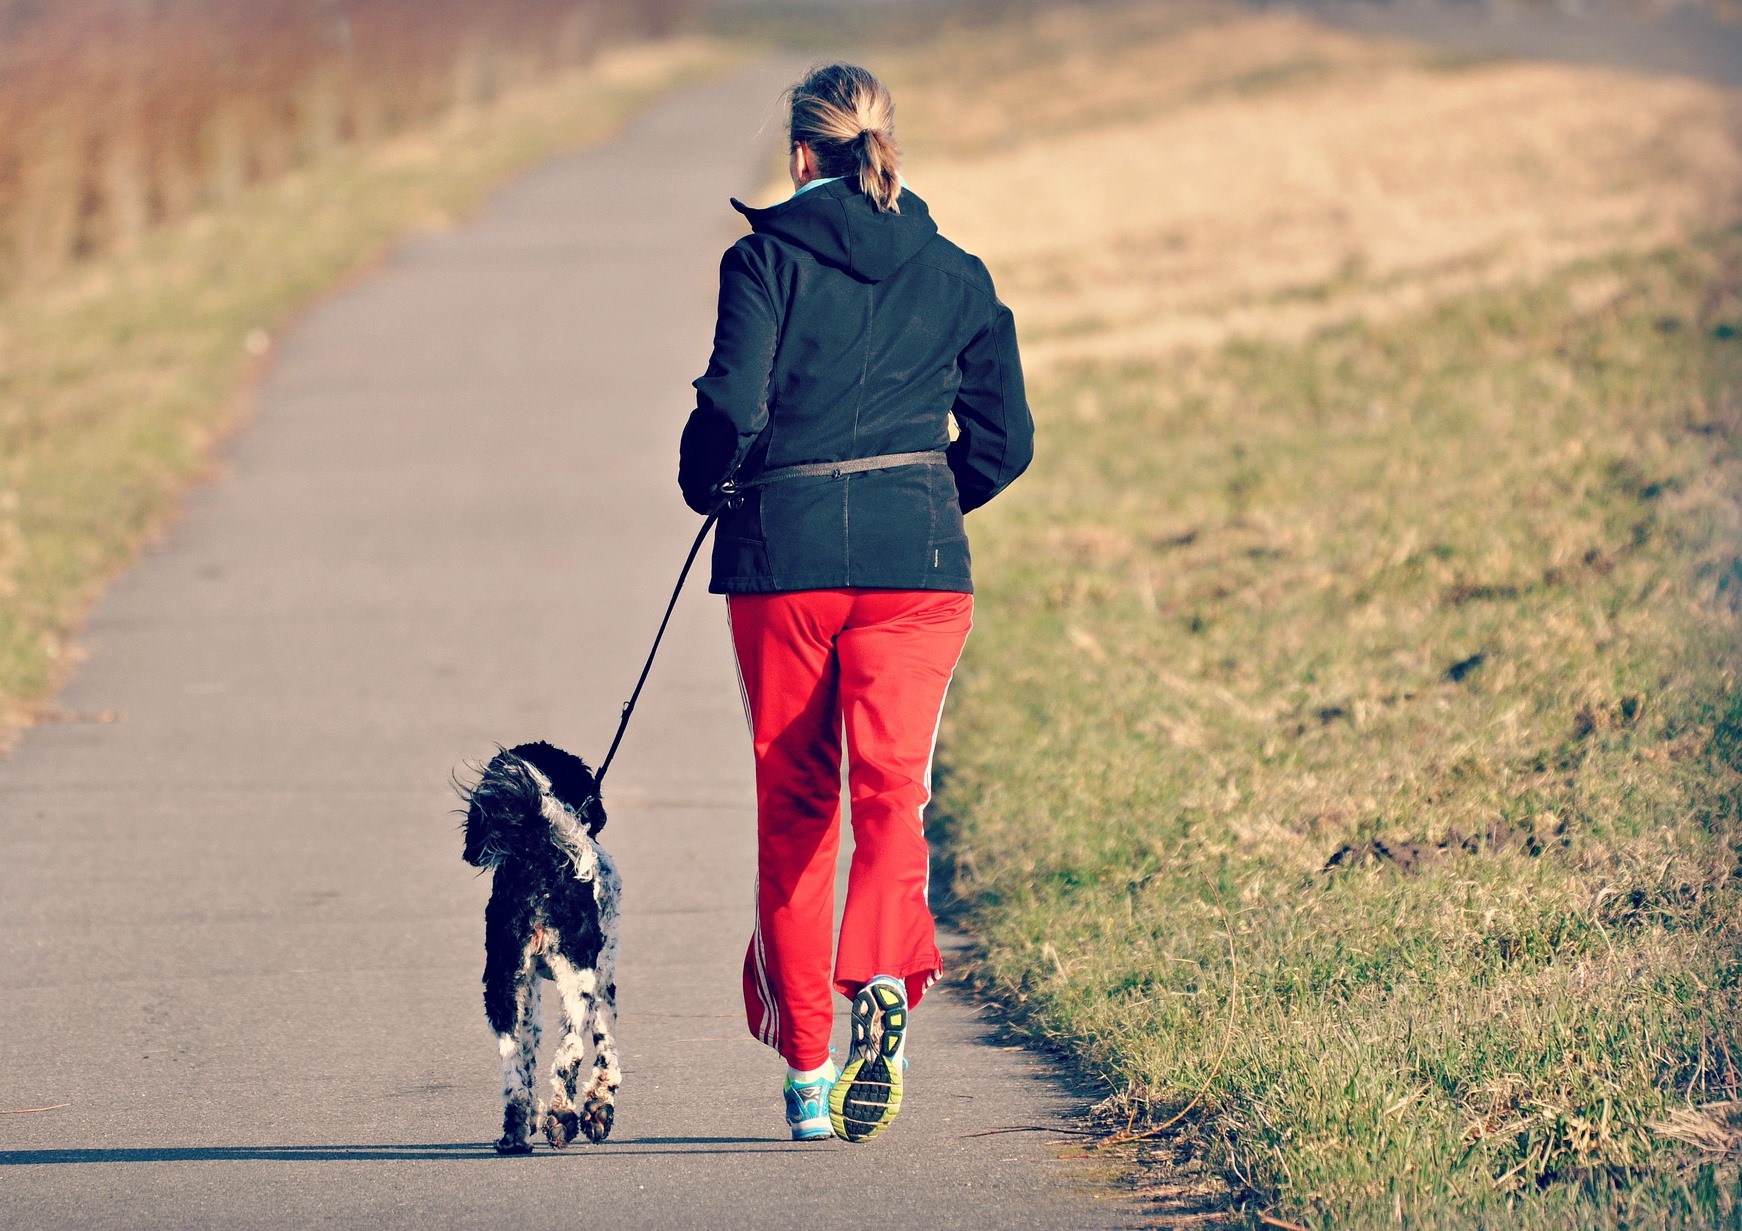 Can Running Prevent Knee Replacement Surgery in Old Age?